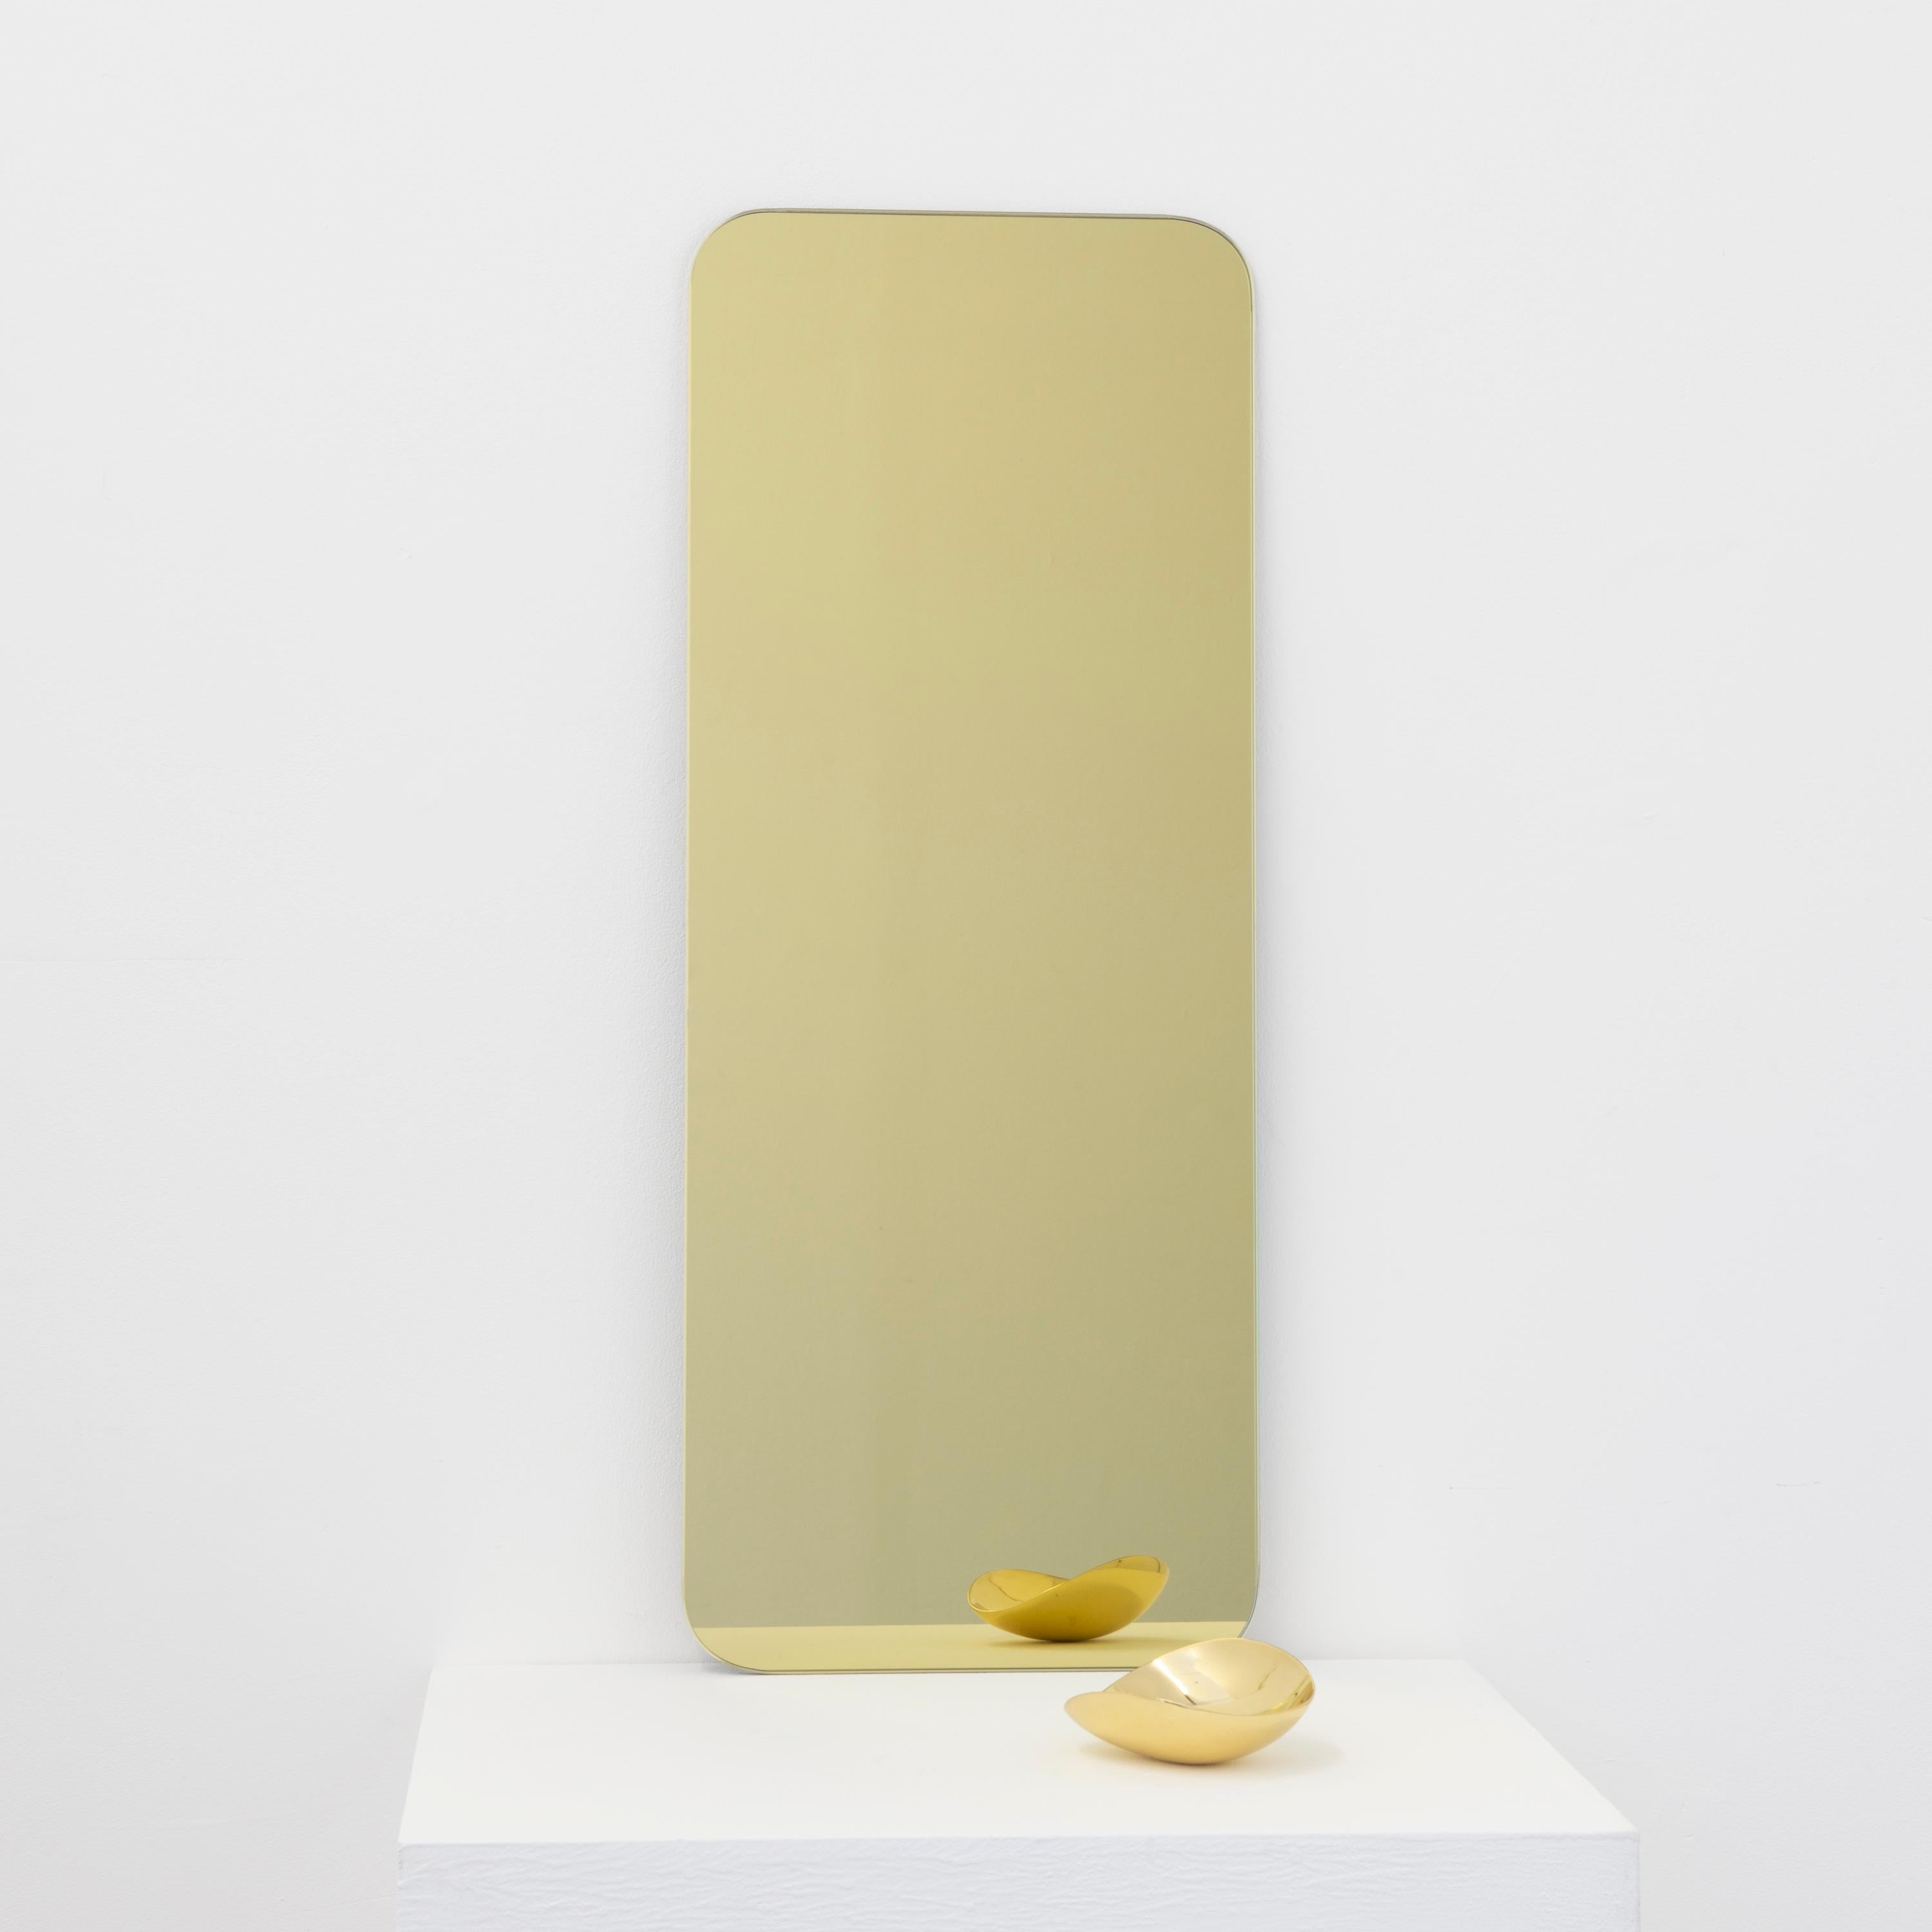 Quadris Gold Rectangular Frameless Minimalist Mirror with Floating Effect, Small In New Condition For Sale In London, GB